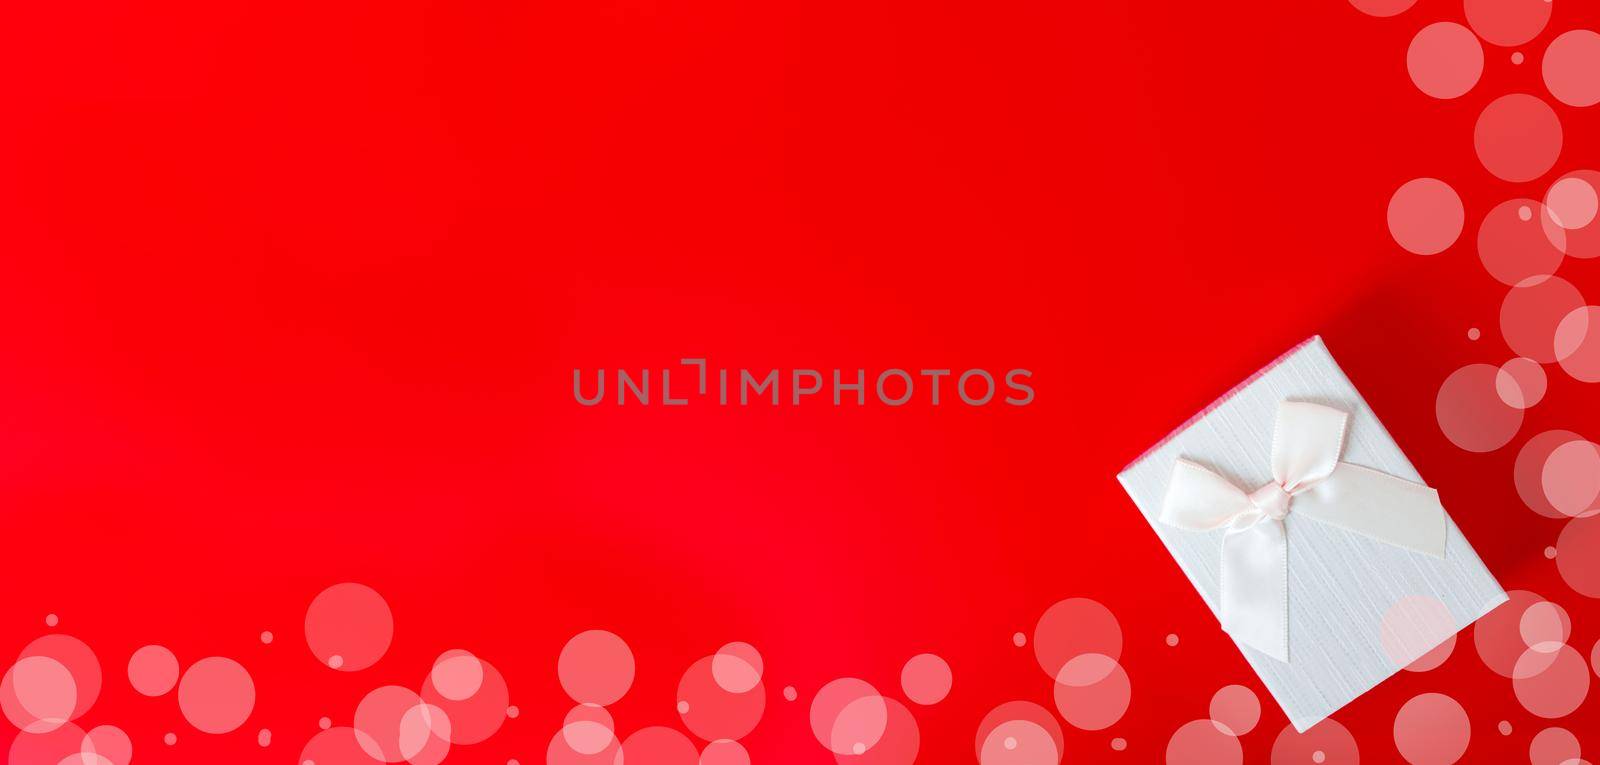 Gift box on red background. Romantic st. Valentine's day concept of greetings. place for your text by lifesummerlin